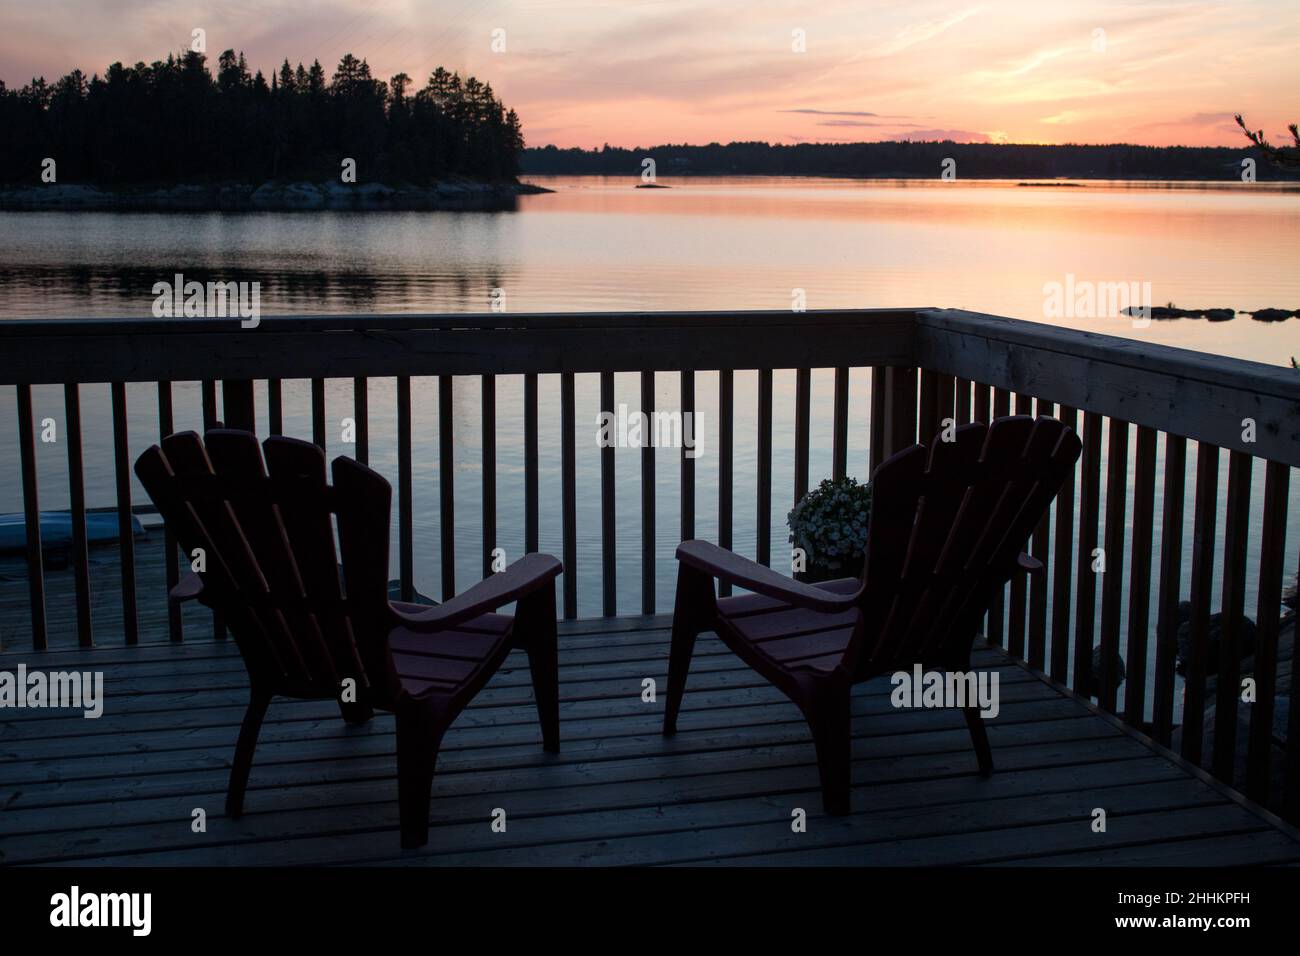 Watching the sunset from the deck chairs overlooking the river Stock Photo